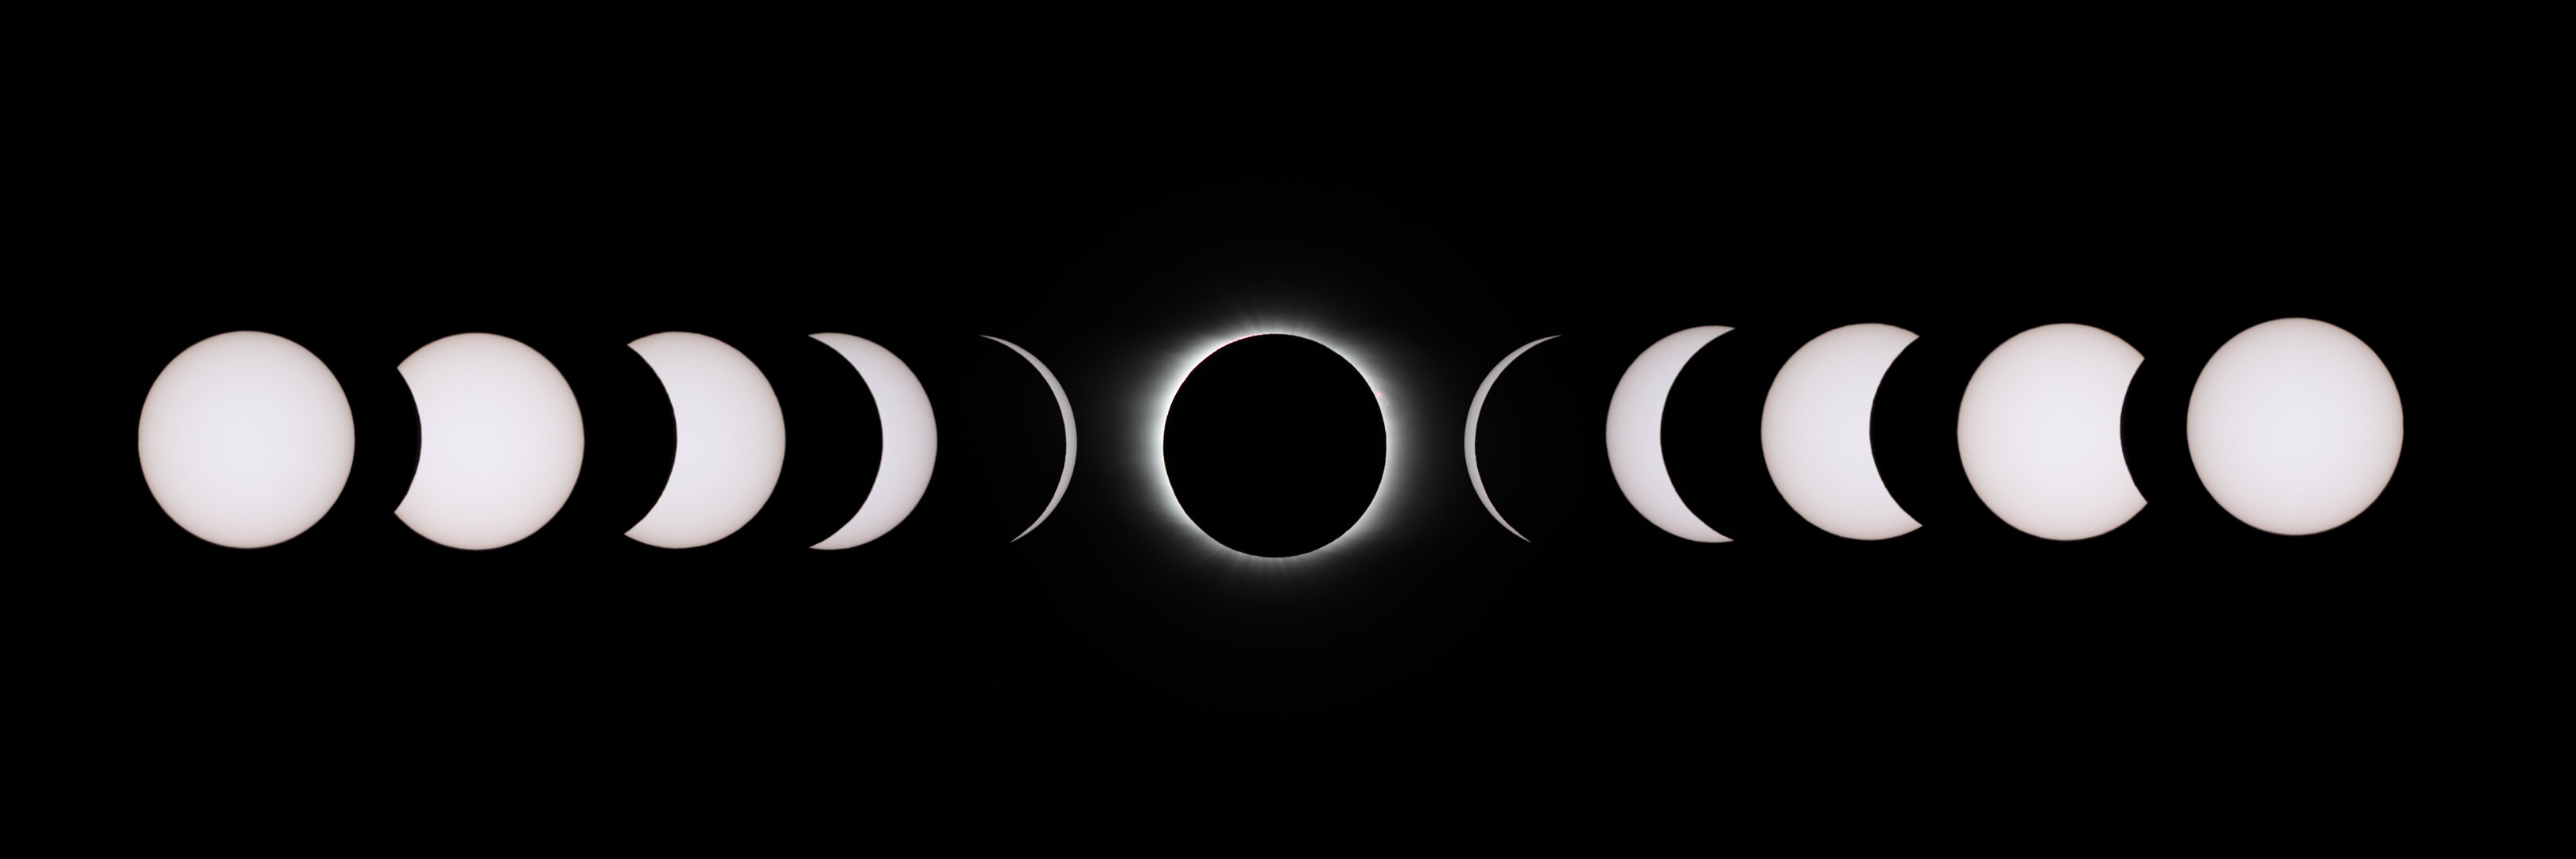 Stages_of_a_total_solar_eclipse_pillars.jpg